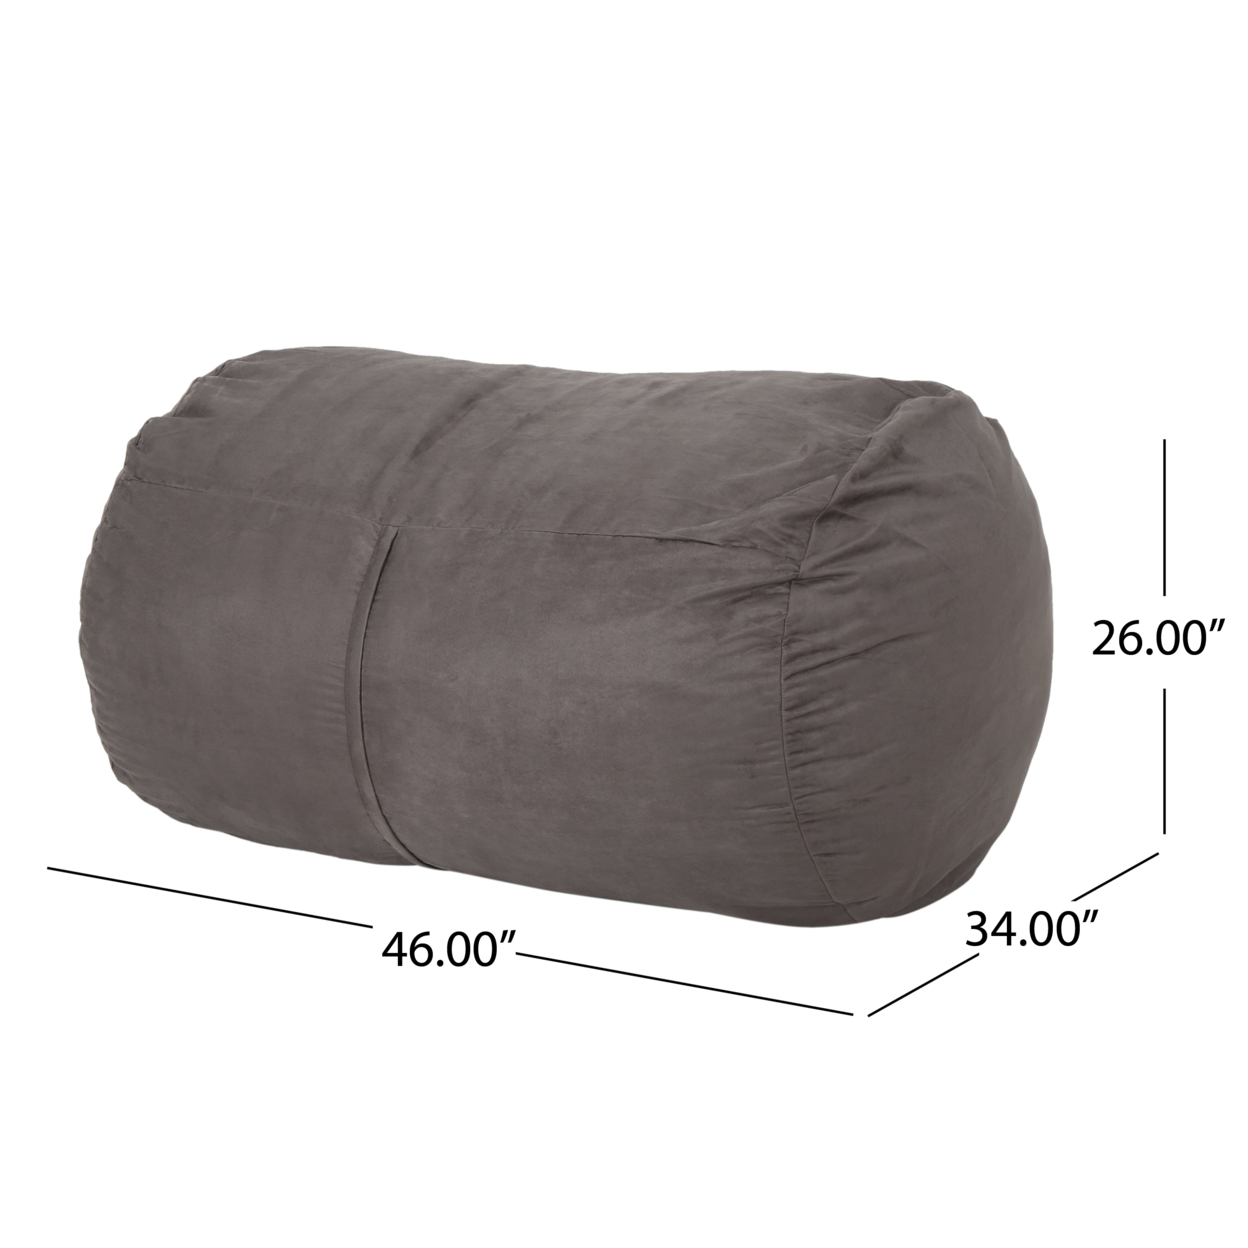 Genevieve Traditional 4 Foot Suede Bean Bag (Cover Only), Chinese Red - Charcoal